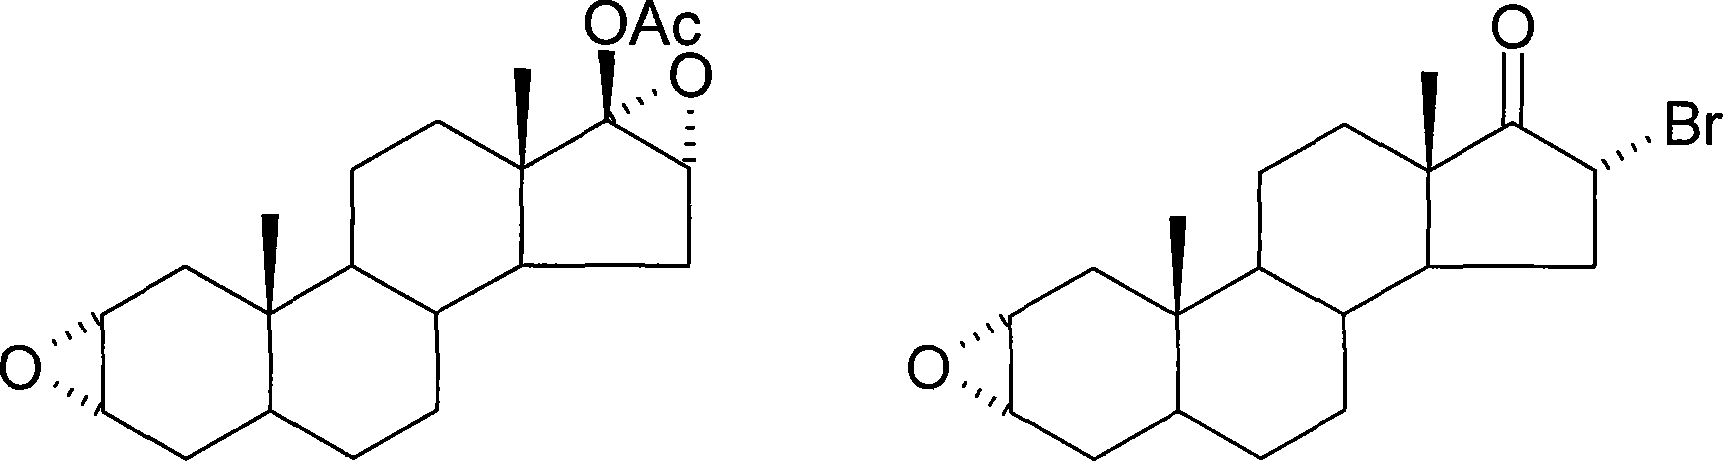 Method of synthesizing 2alpha,3alpha-epoxy-16alpha-bromo-5alpha-androsterone-17-one